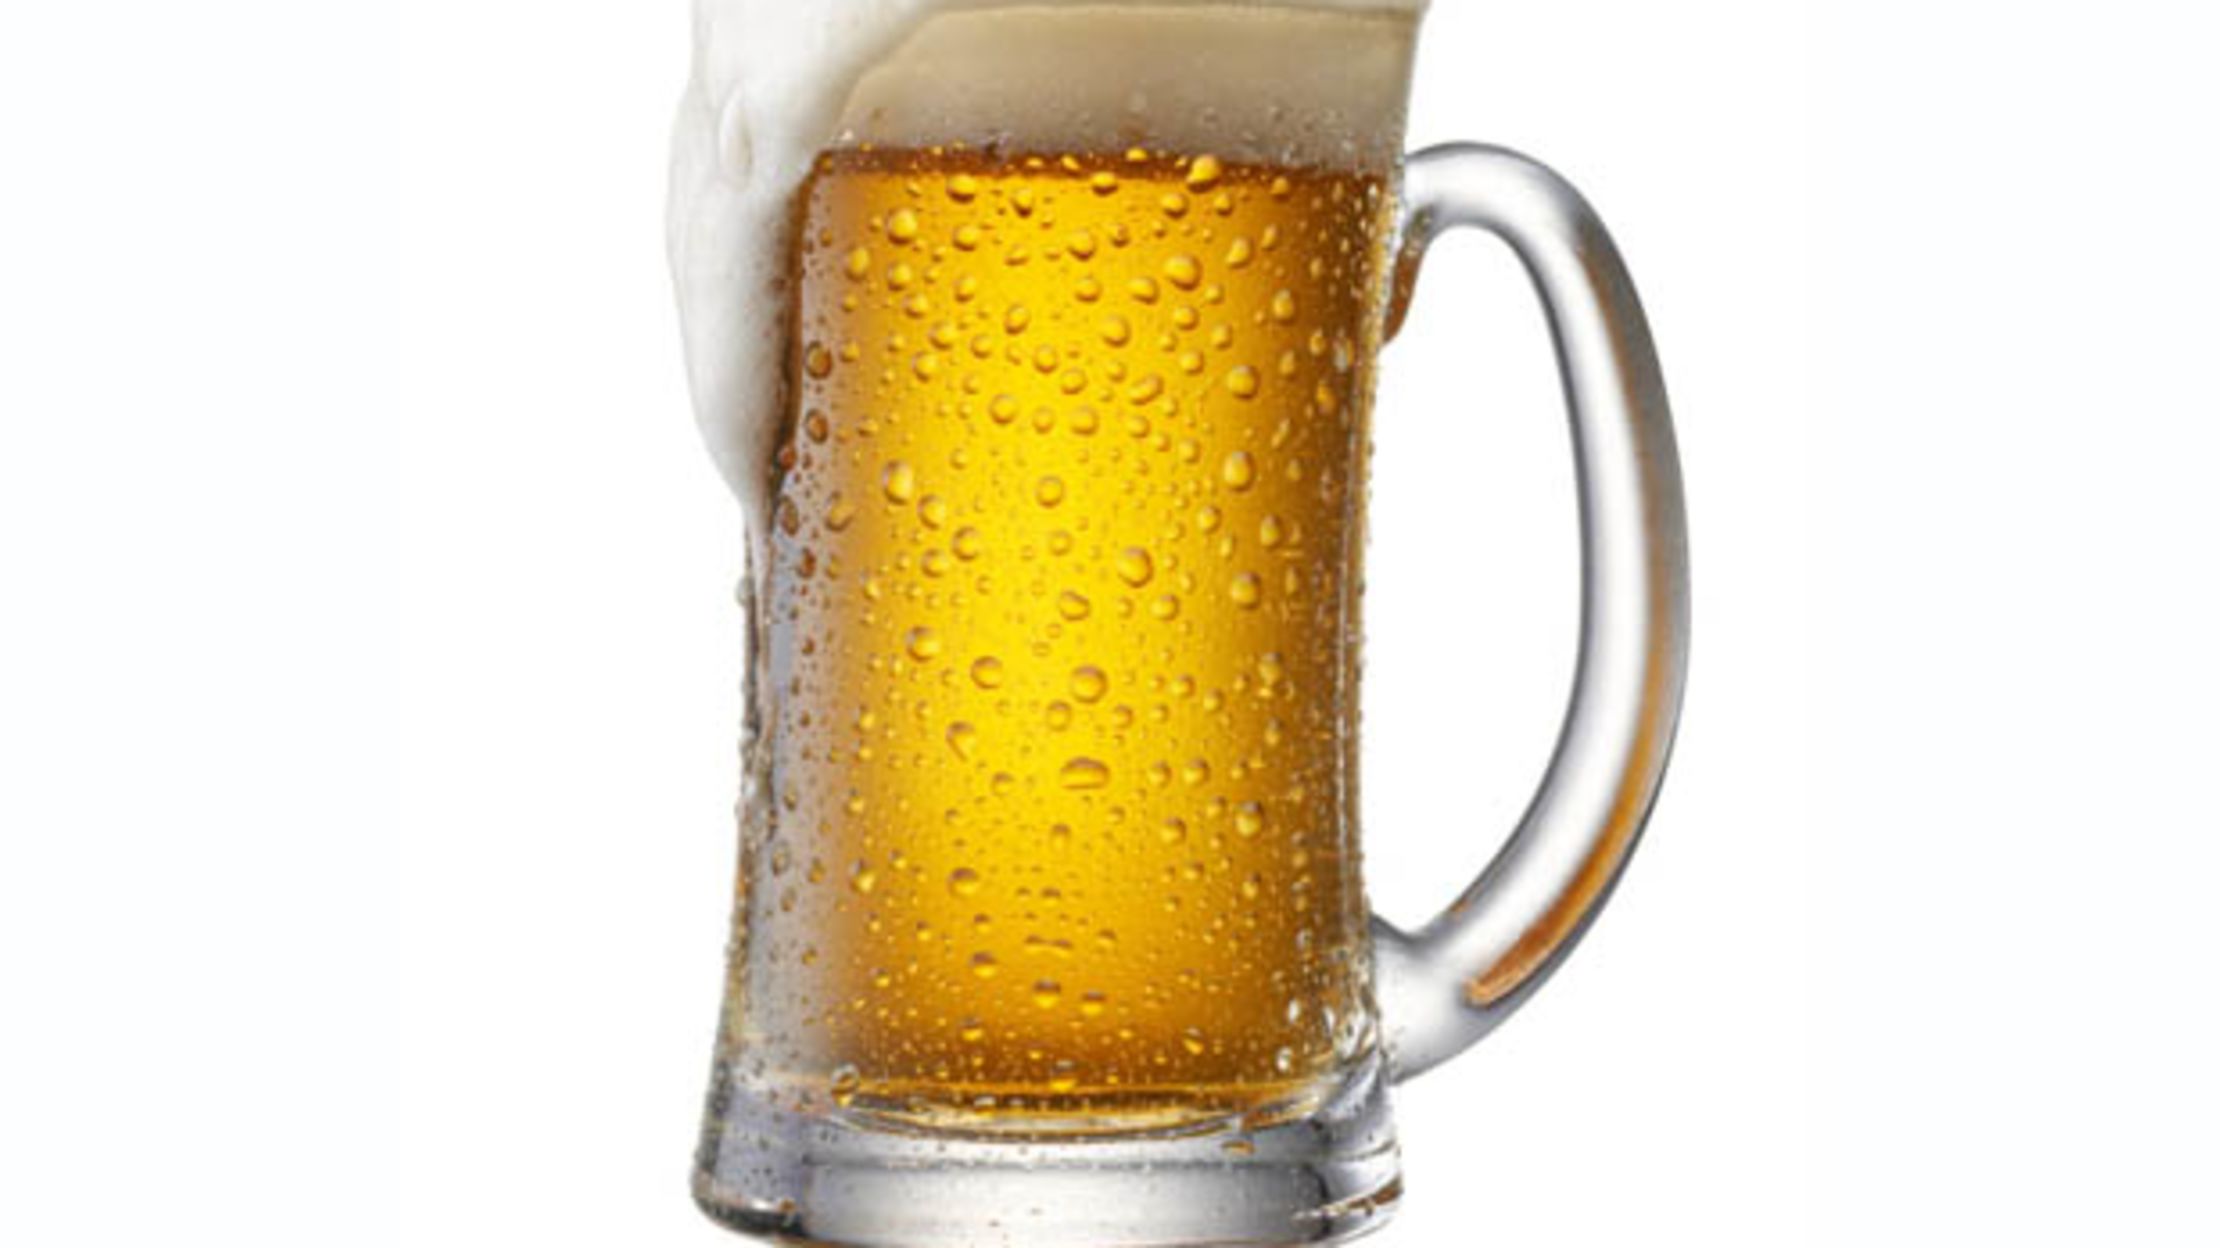 The Missing Links: Frosty Cold Facts About Beer | Mental Floss